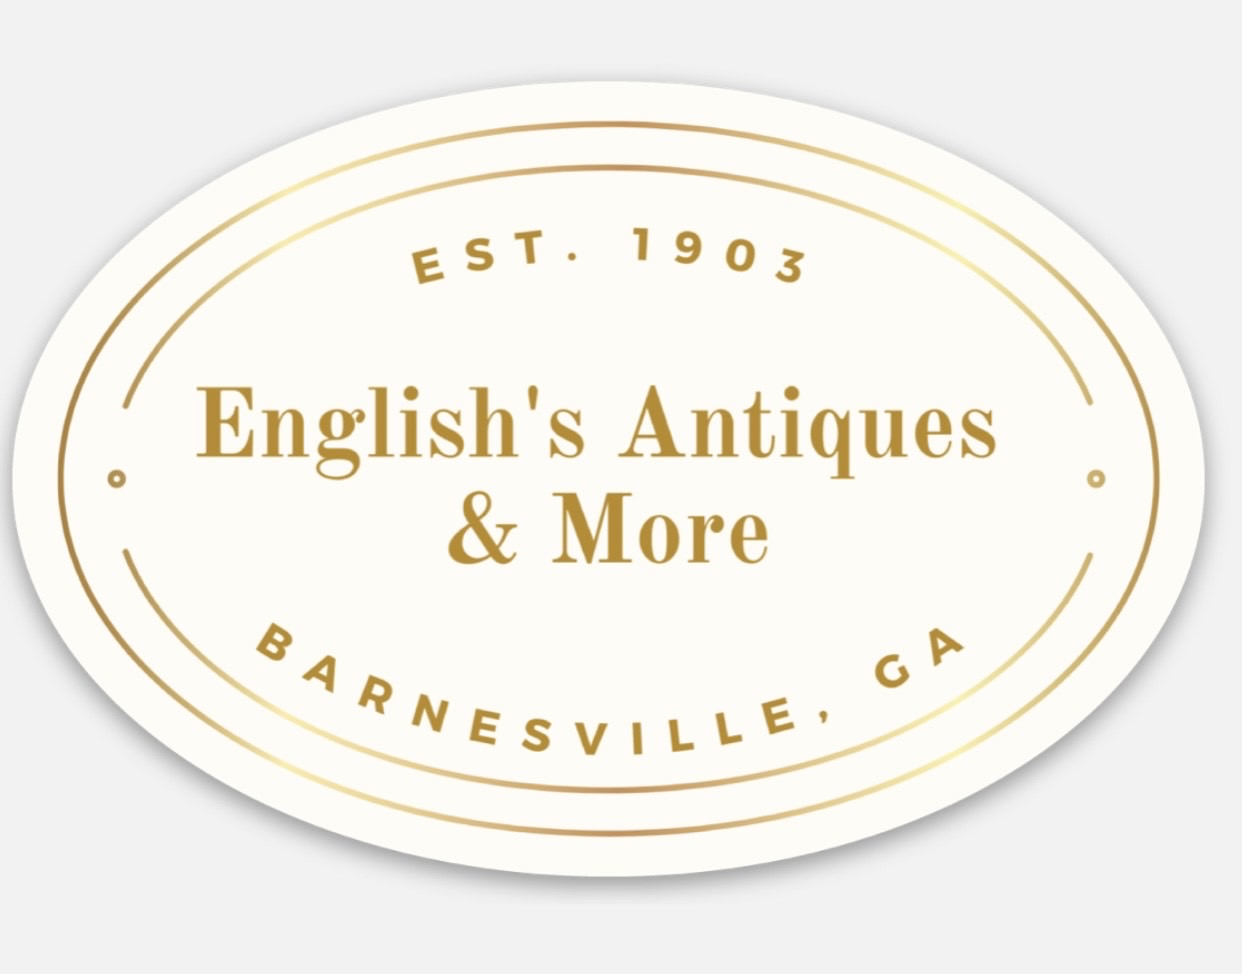 English's Antiques & More